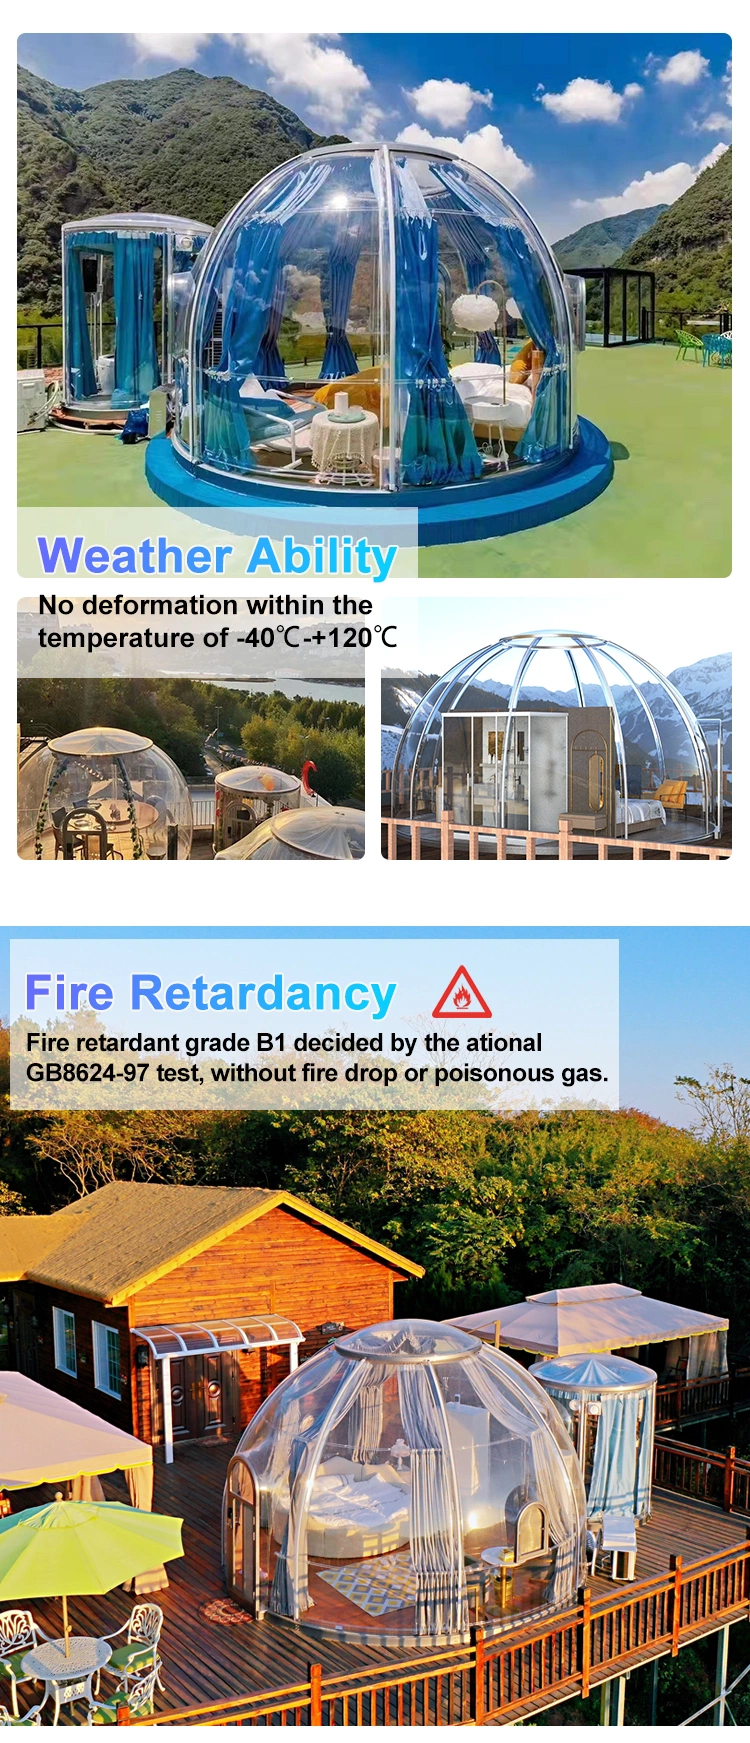 Glamping Tent Luxury Transparent Dome Tent Geodesic Outdoor Camping Dome Tent for Resort Hotel, Camping, Outdoor Activities